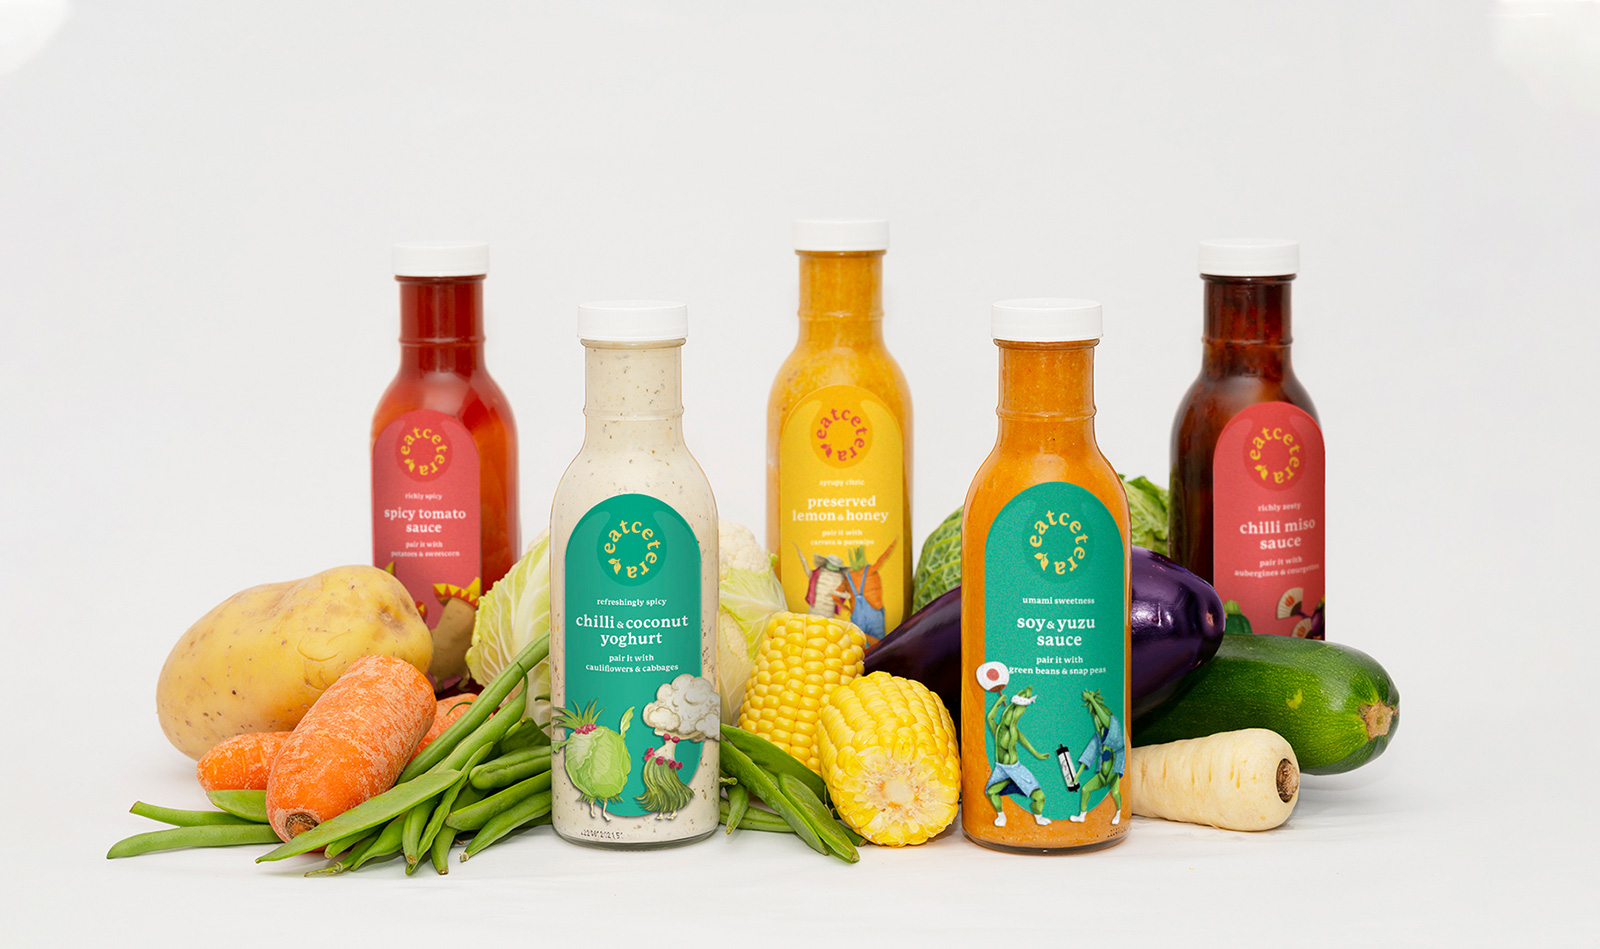 Photograph of sauce bottles surrounded by vegetables.